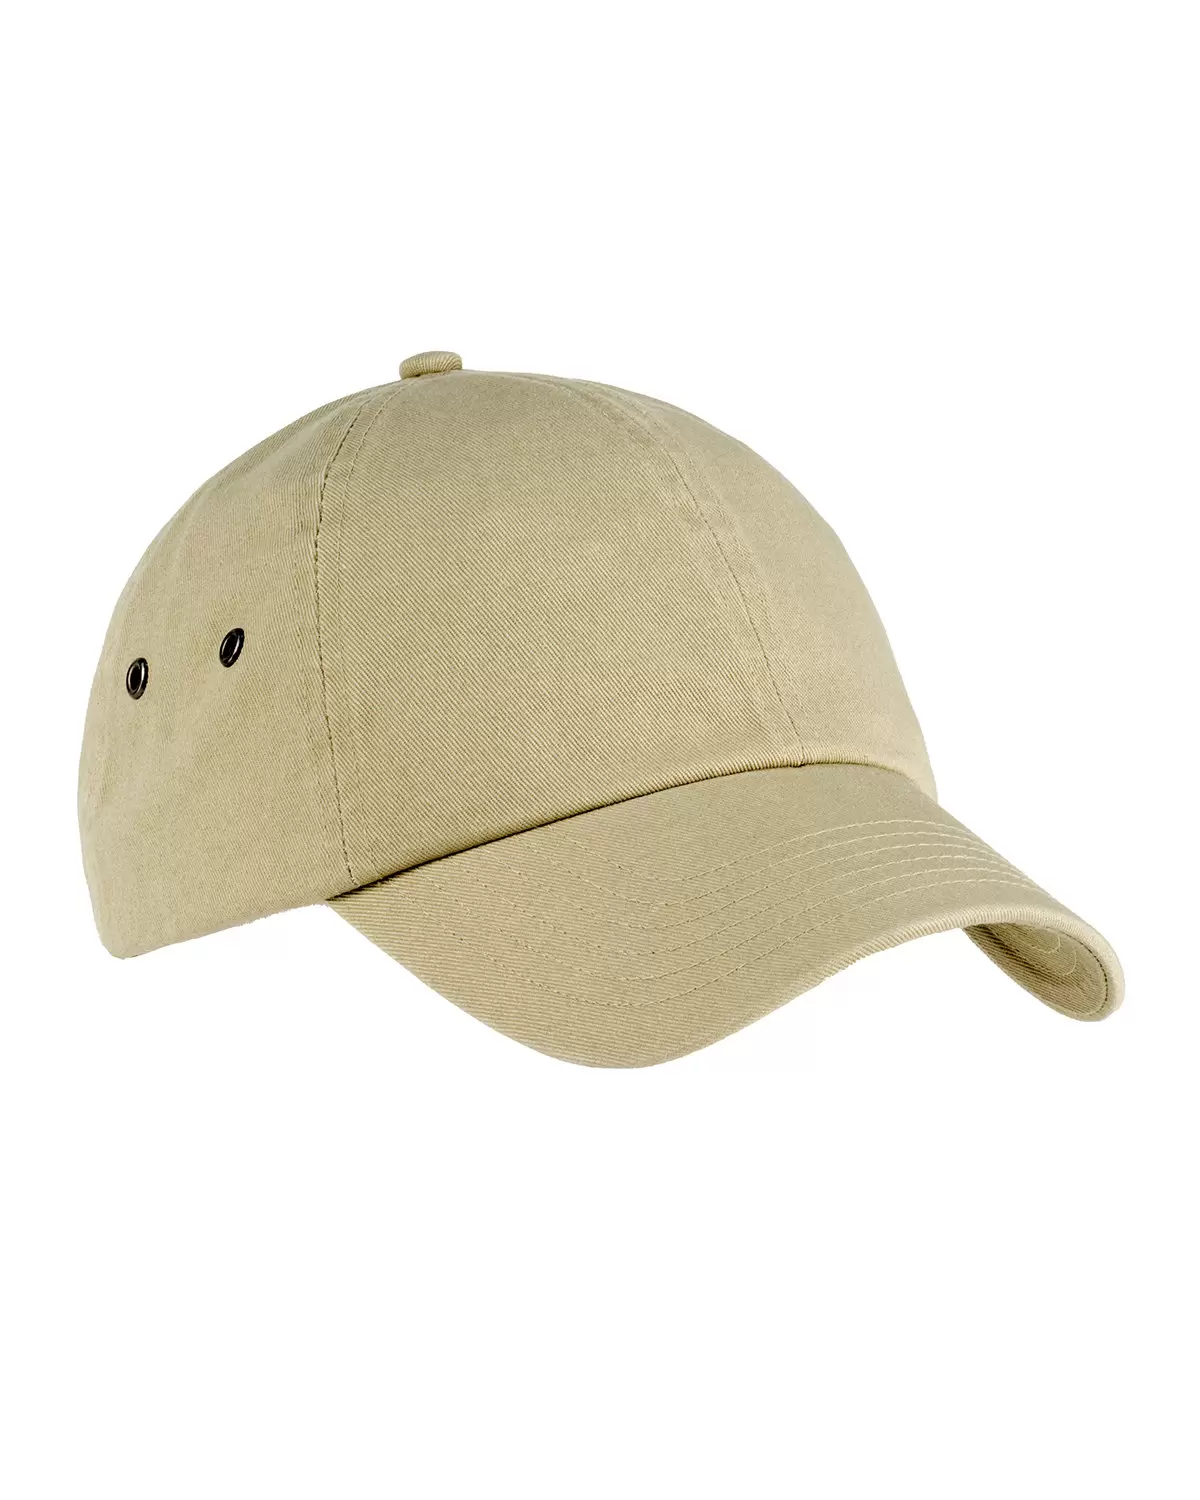 BA529 Big Accessories Washed Baseball Cap - From